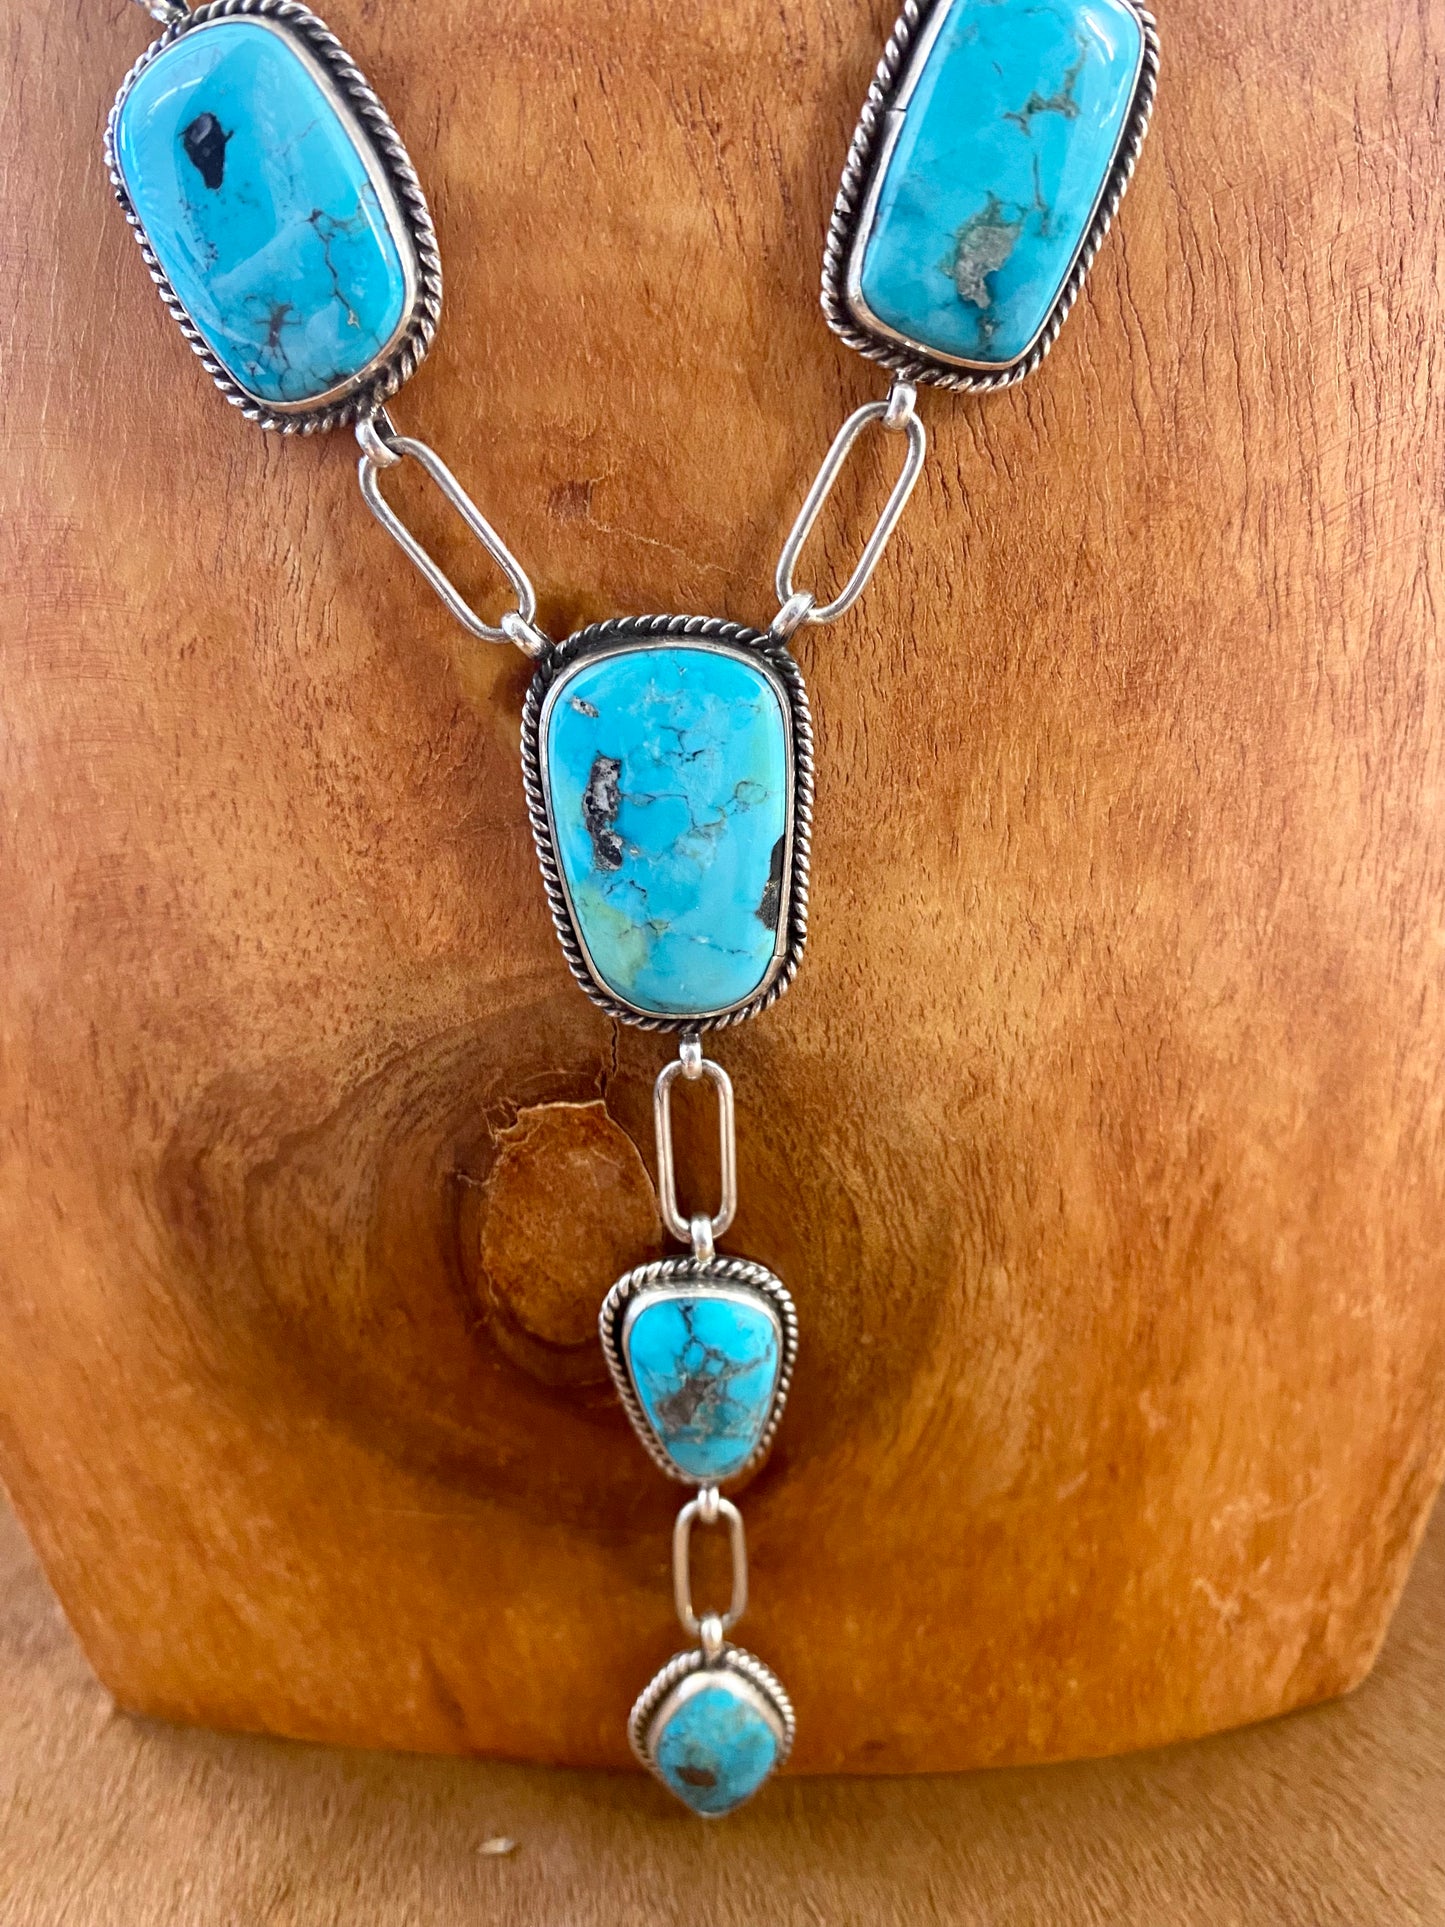 Stunning Morenci turquoise lariat style sterling silver Native American-made statement 31" inches length necklace. The perfect necklace to gift to your loved one or keep for your own jewelry collection! This piece is stamped sterling and signed "K" by the talented Native artist Karlene Goodluck.   Size: 31” inches in length   Stone: Morenci Turquoise  Signed: YES "K"  Artist / Hallmark: Karlene Goodluck